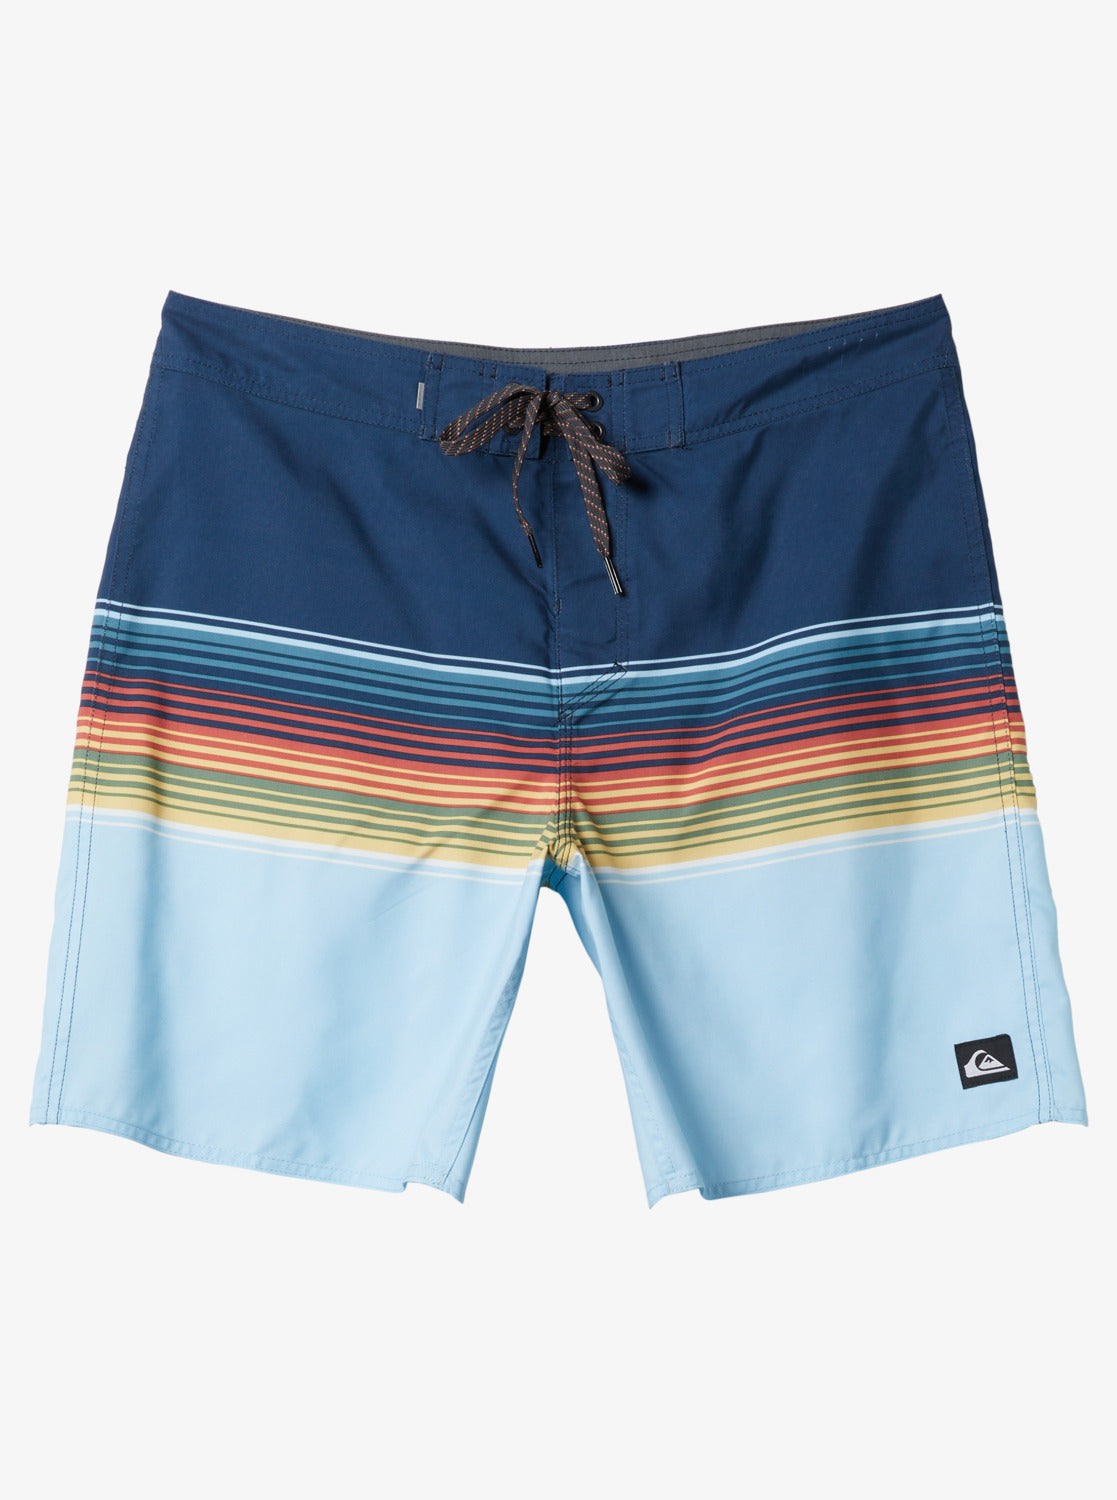 Quiksilver Everyday Swell Vision Youth 17 Boardshort - Midnight Navy